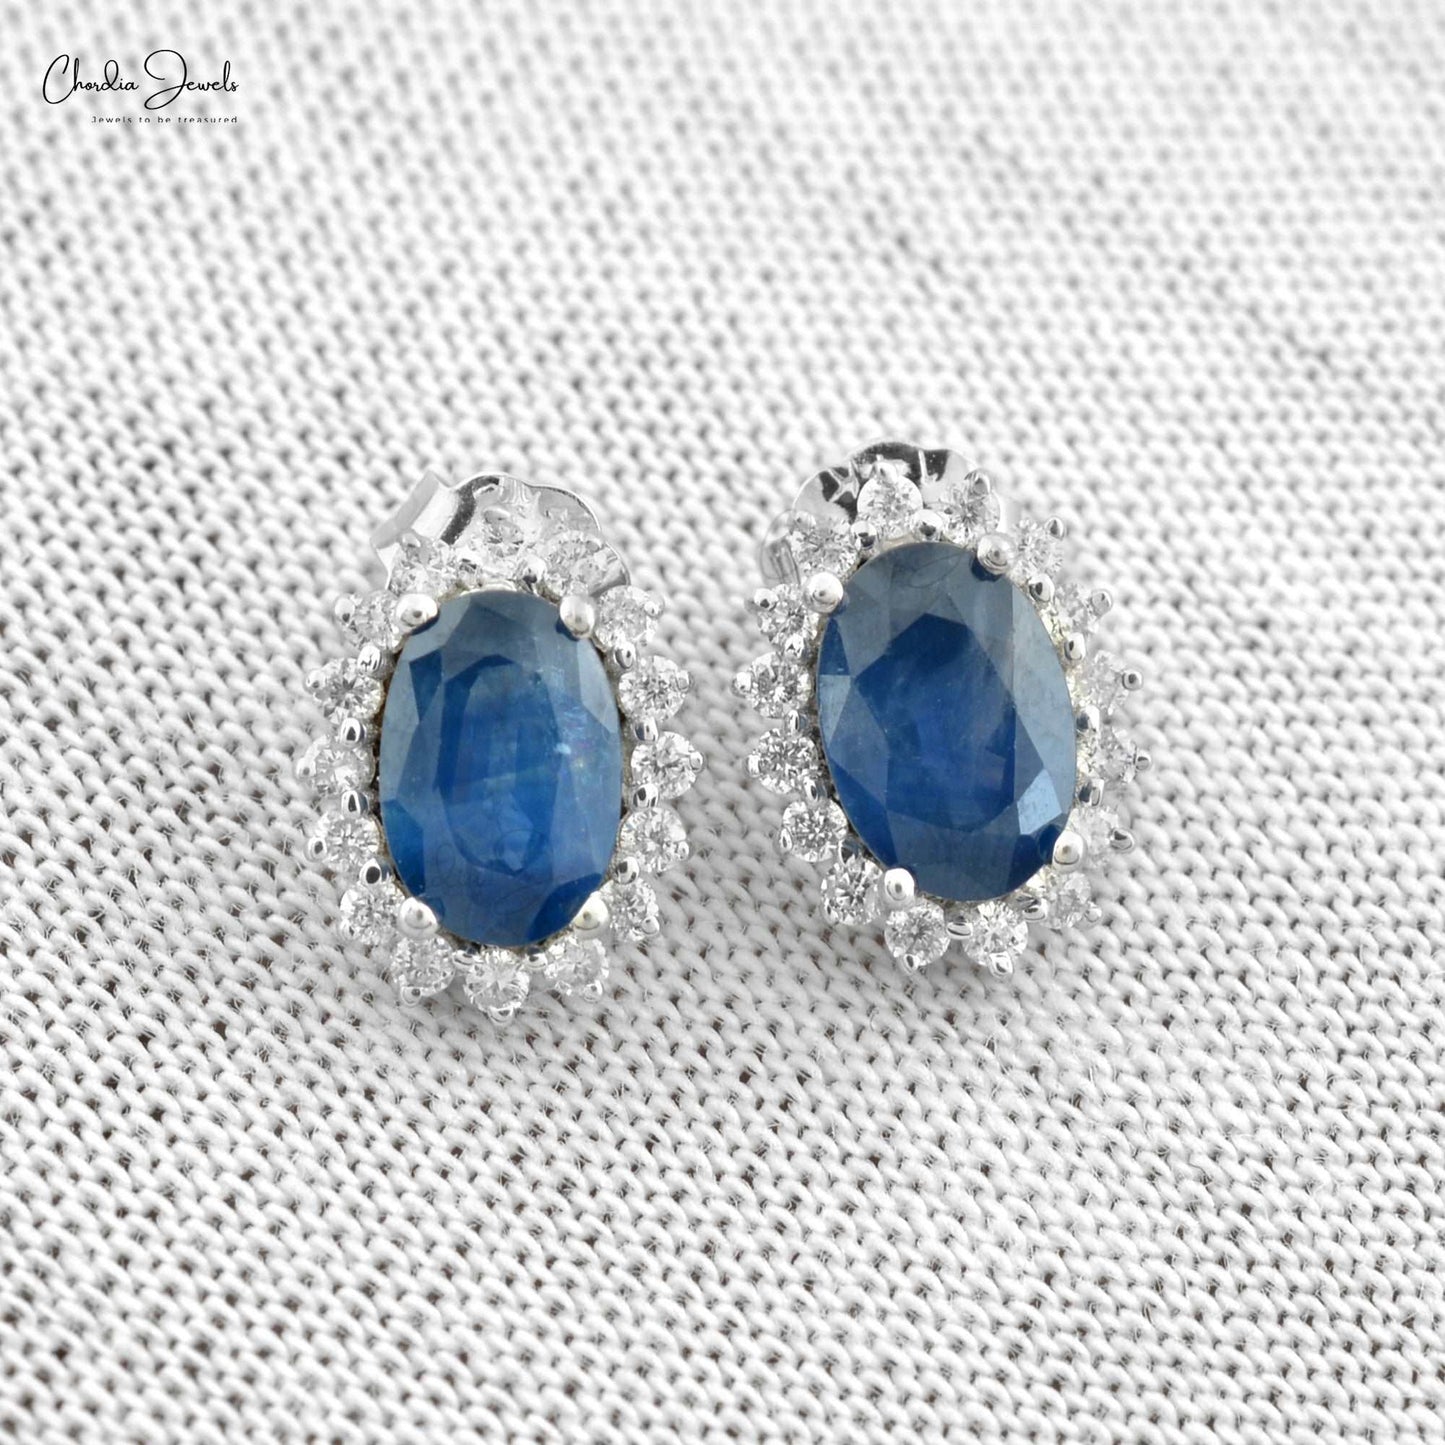 Load image into Gallery viewer, 1.16 Carat Oval Cut Natural  Blue Sapphire Earrings For Anniversary, 14k Solid White Gold Diamond and Gemstone Halo Earrings For Birthday Gift
